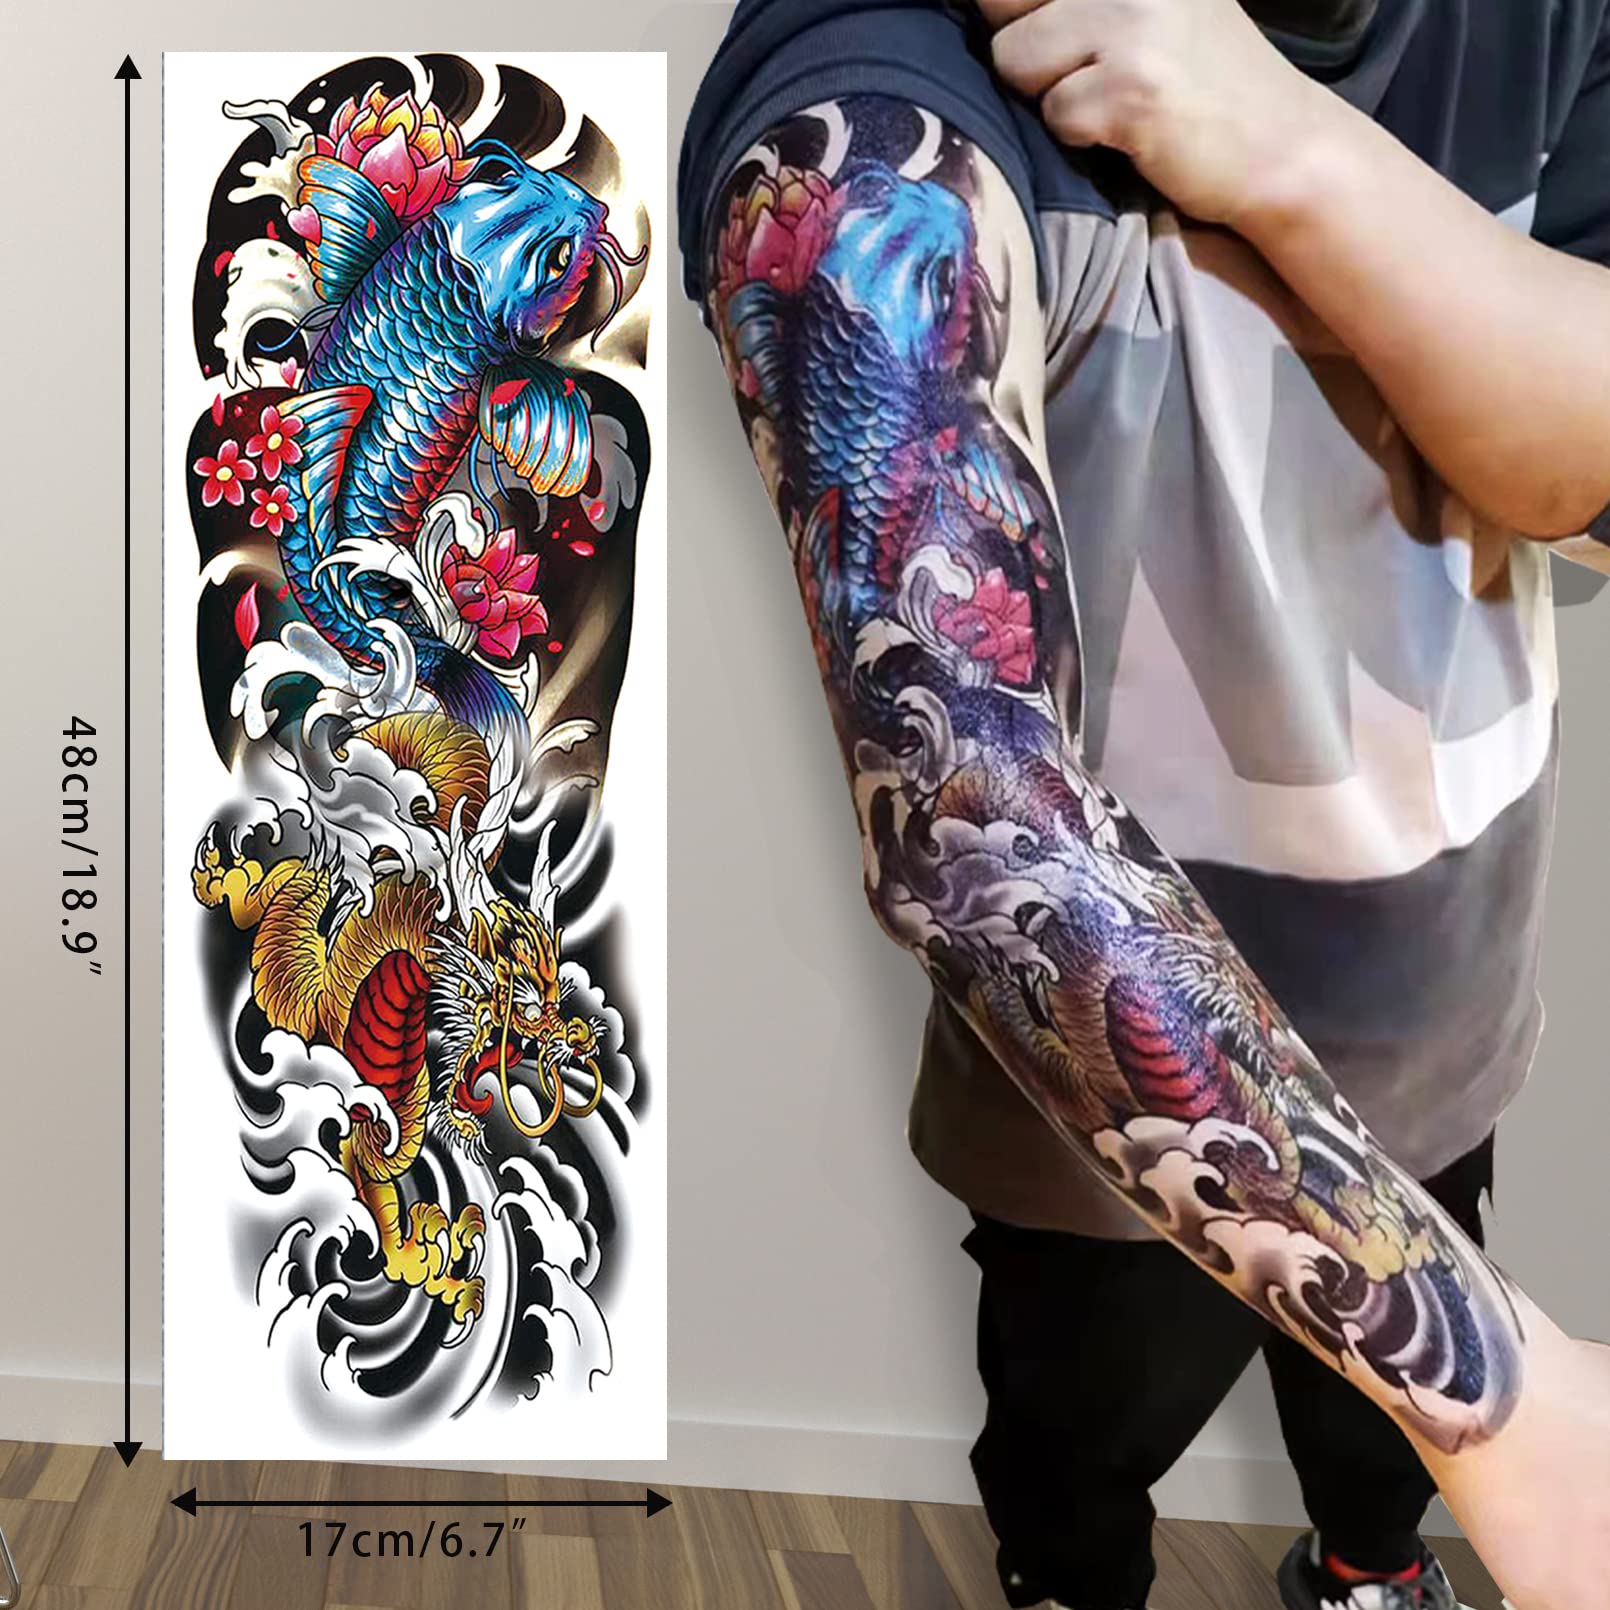 CUTELIILI Temporary Tattoo for Men and Women,12sheets (L19“xW7”) Full Sleeve Tattoos Stickers for Teens, Colorful Fake Tattoos